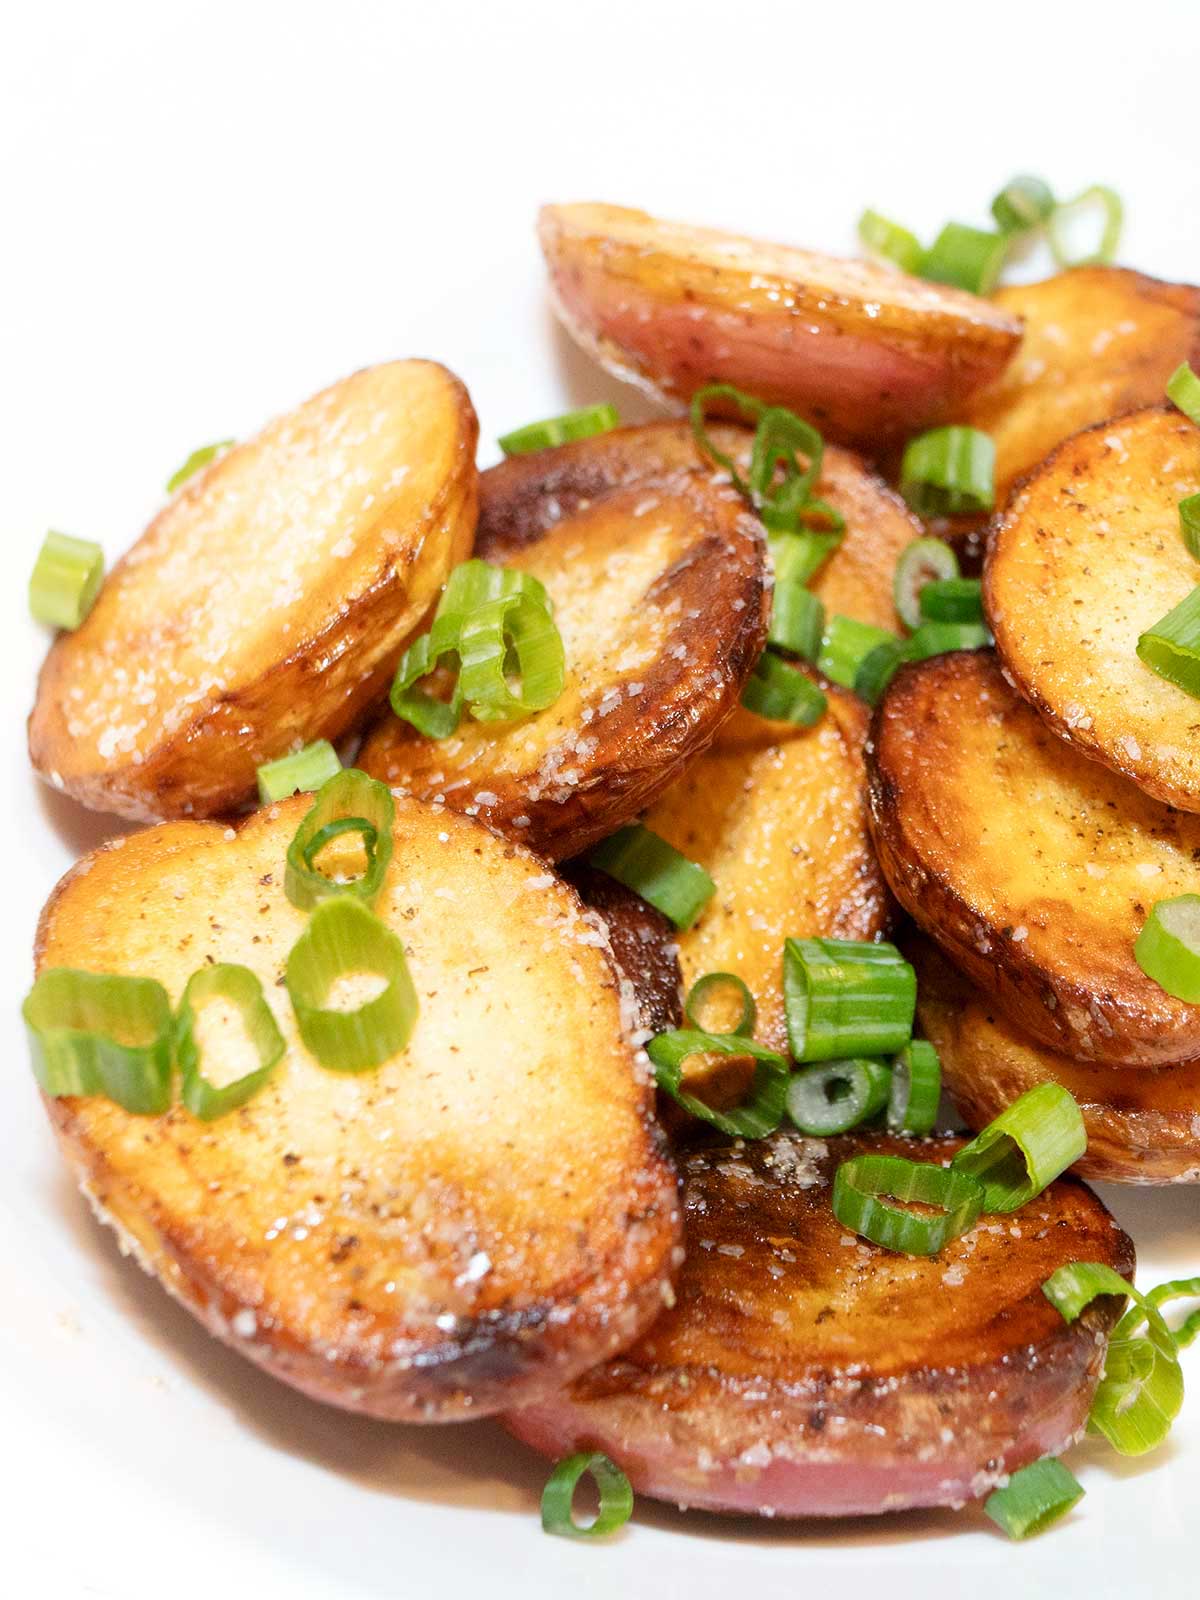 Easy Stove Top Roasted Potatoes